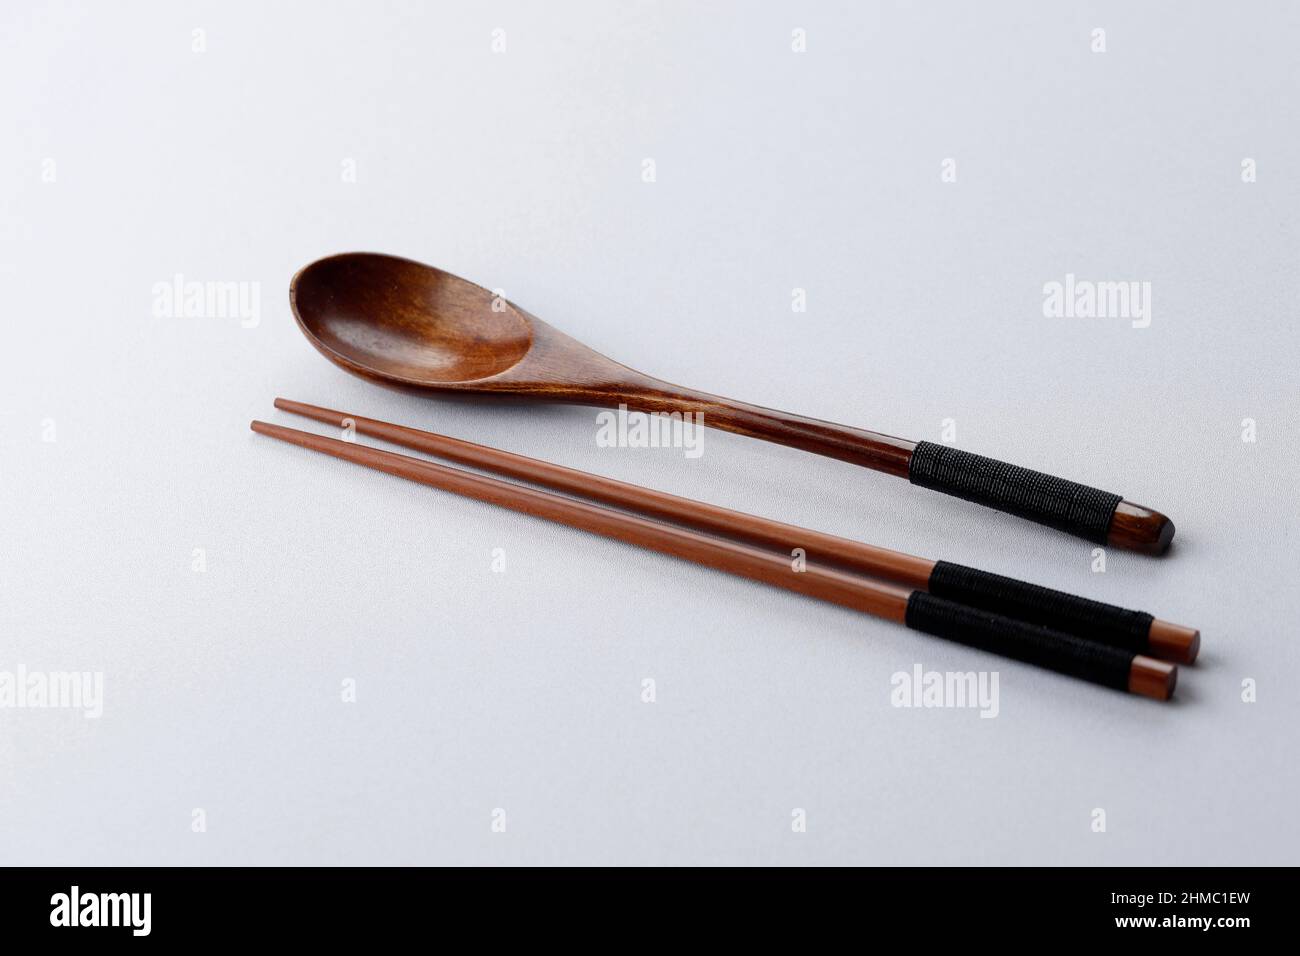 Korean Spoon and Chopstick Wooden Cutlery Isolated on White Table, Copy Space, Eat Concept Stock Photo